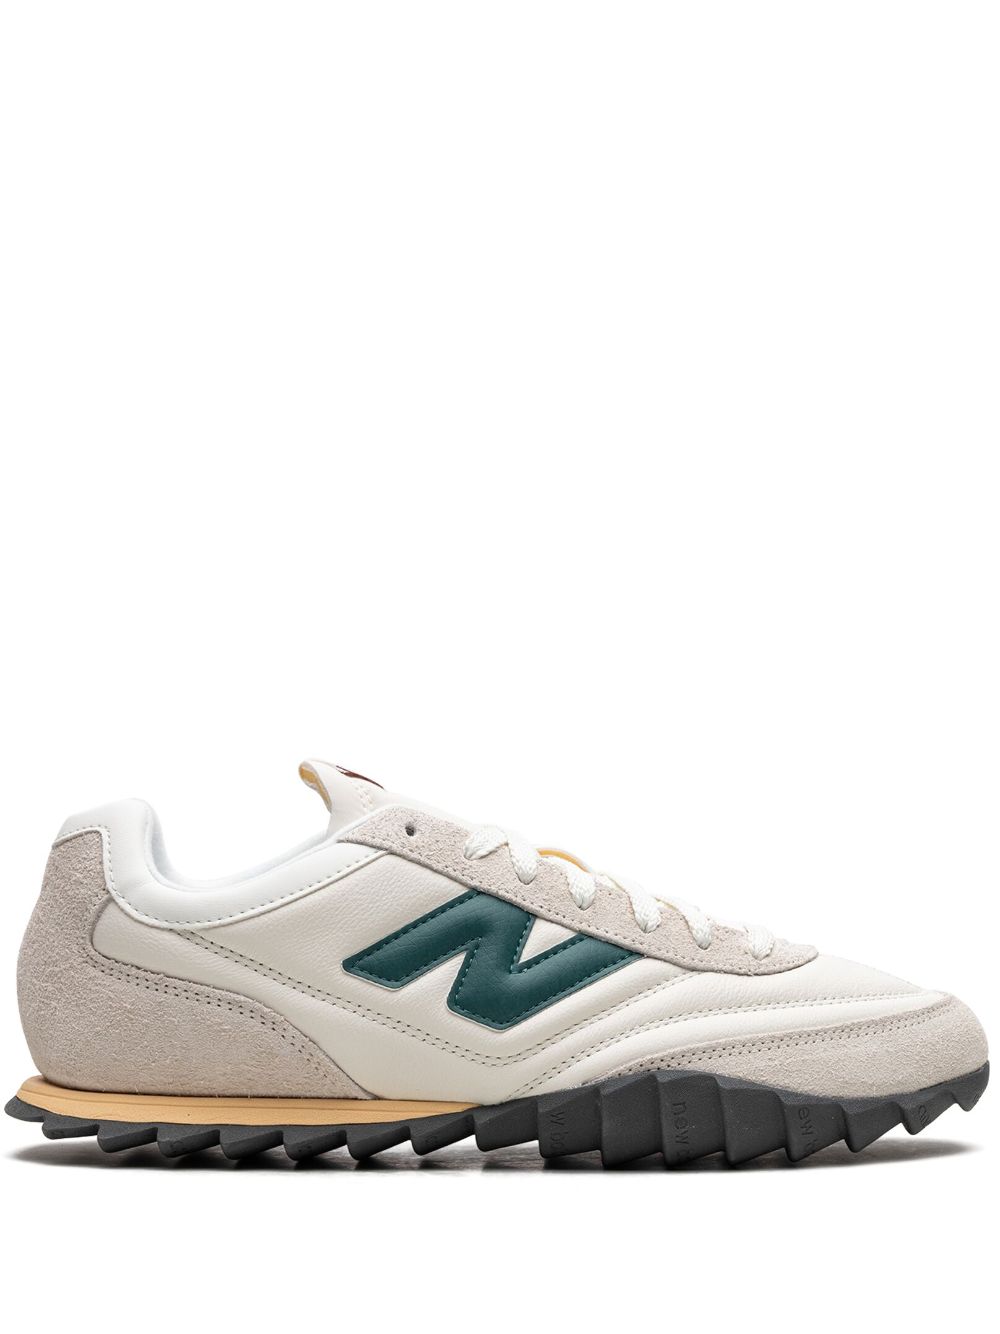 New Balance RC30 "Turtledove" sneakers - Neutrals